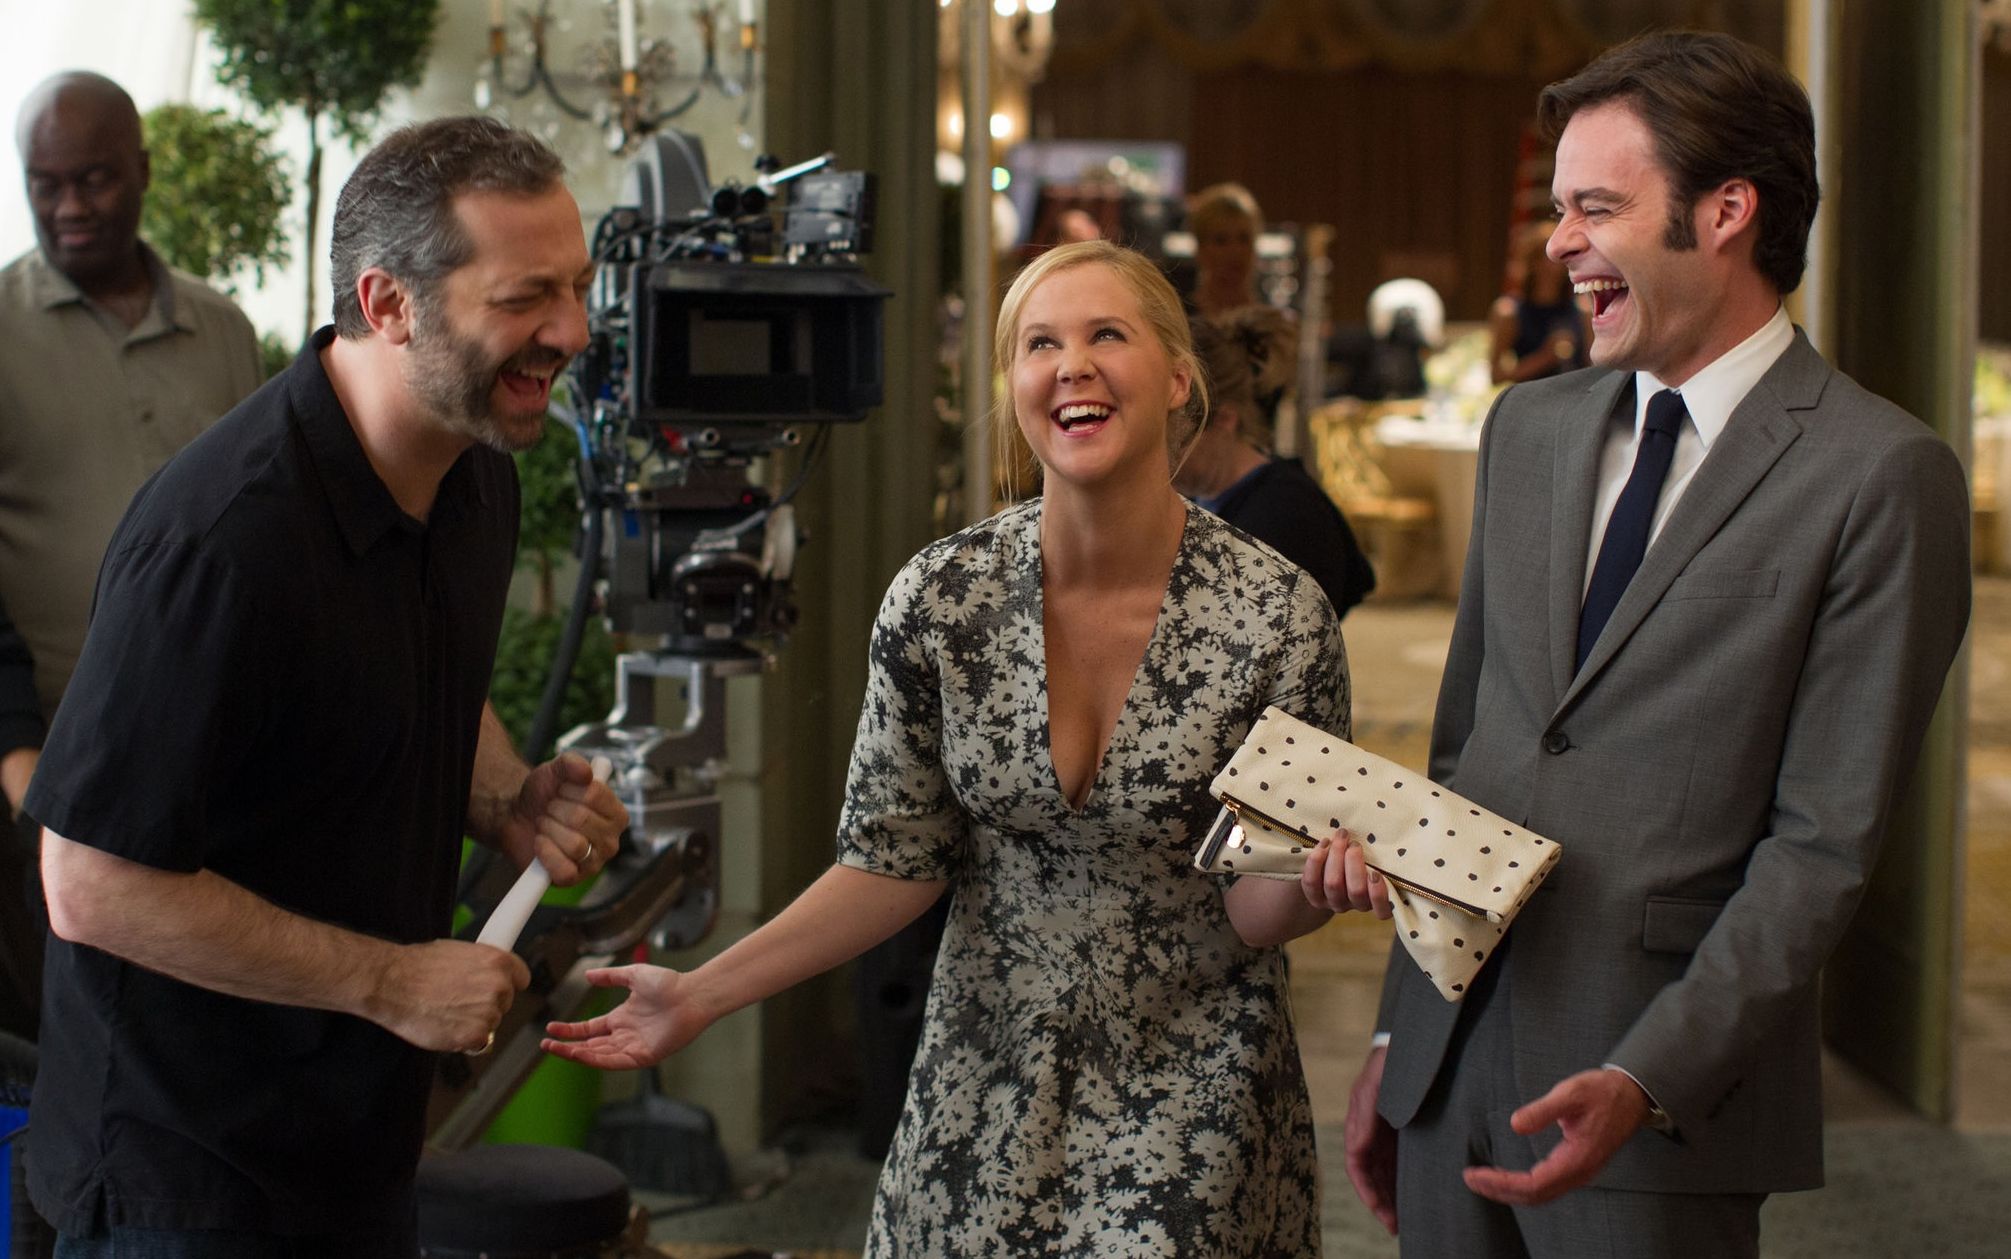 Judd Apatow, Amy Schumer and Bill Hader on the set of Trainw